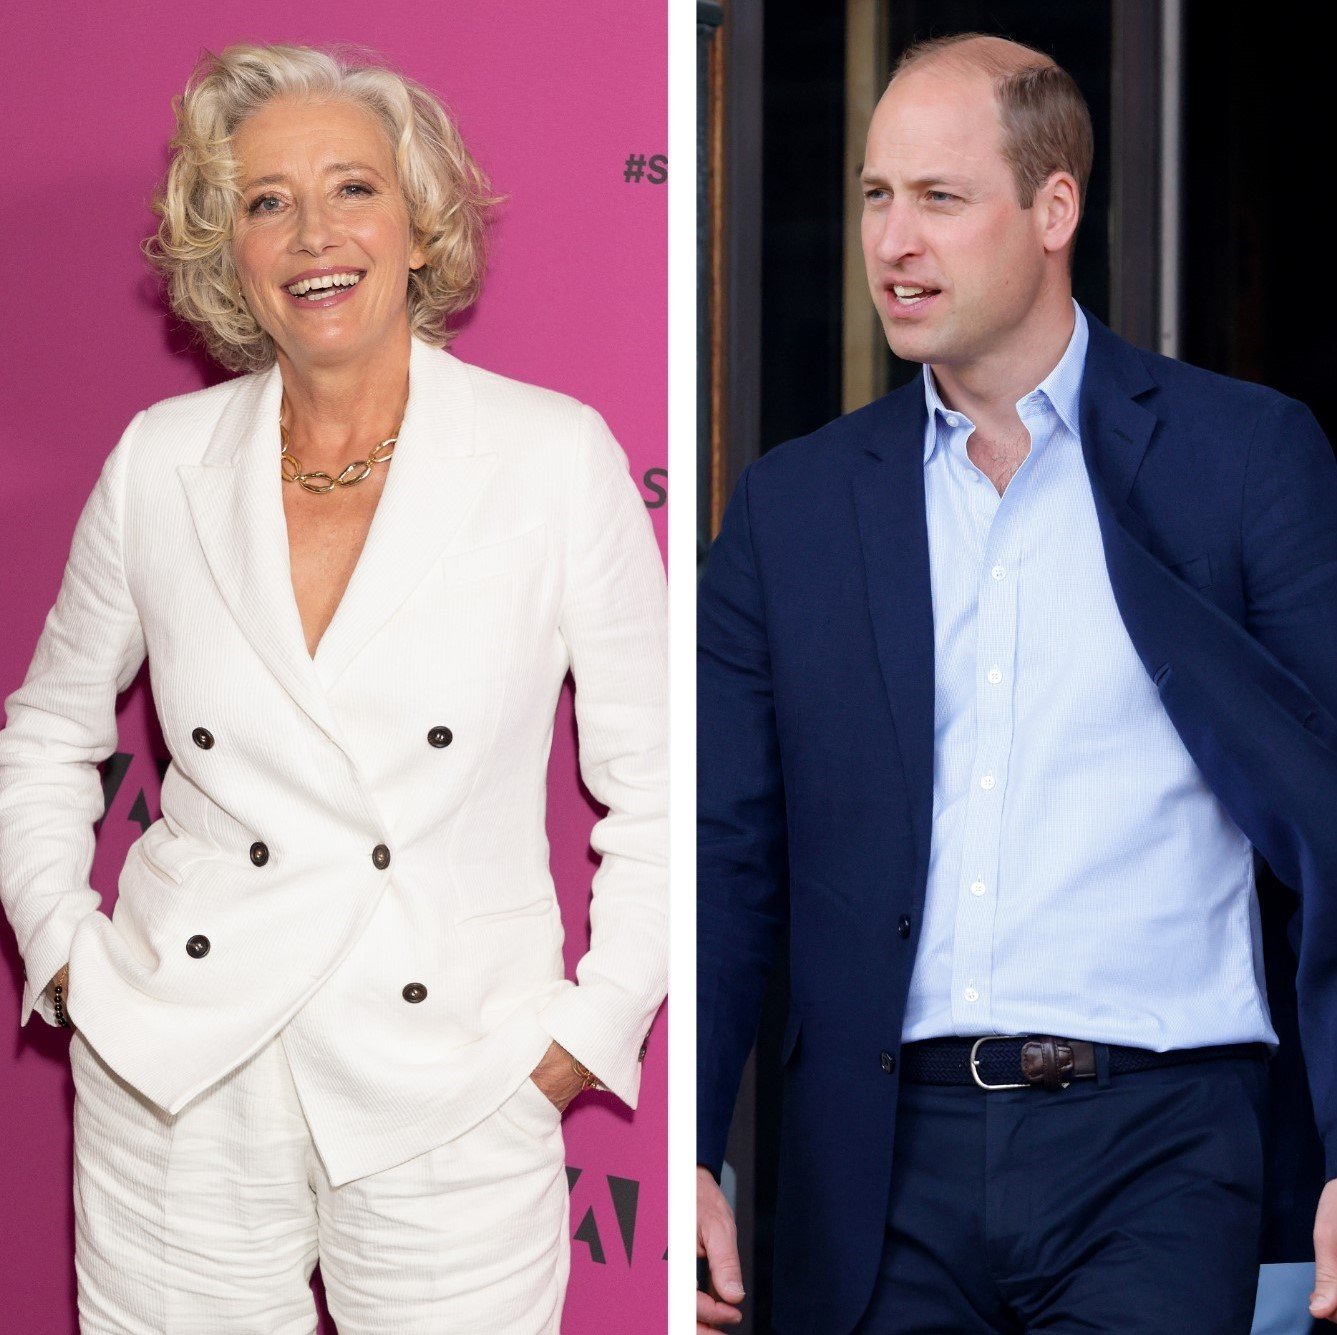 (L): Emma Thompson, who said Prince William rejected her kiss, attending a premiere at Sundance Film Festival, (R): Prince William leaving a museum after an official visit